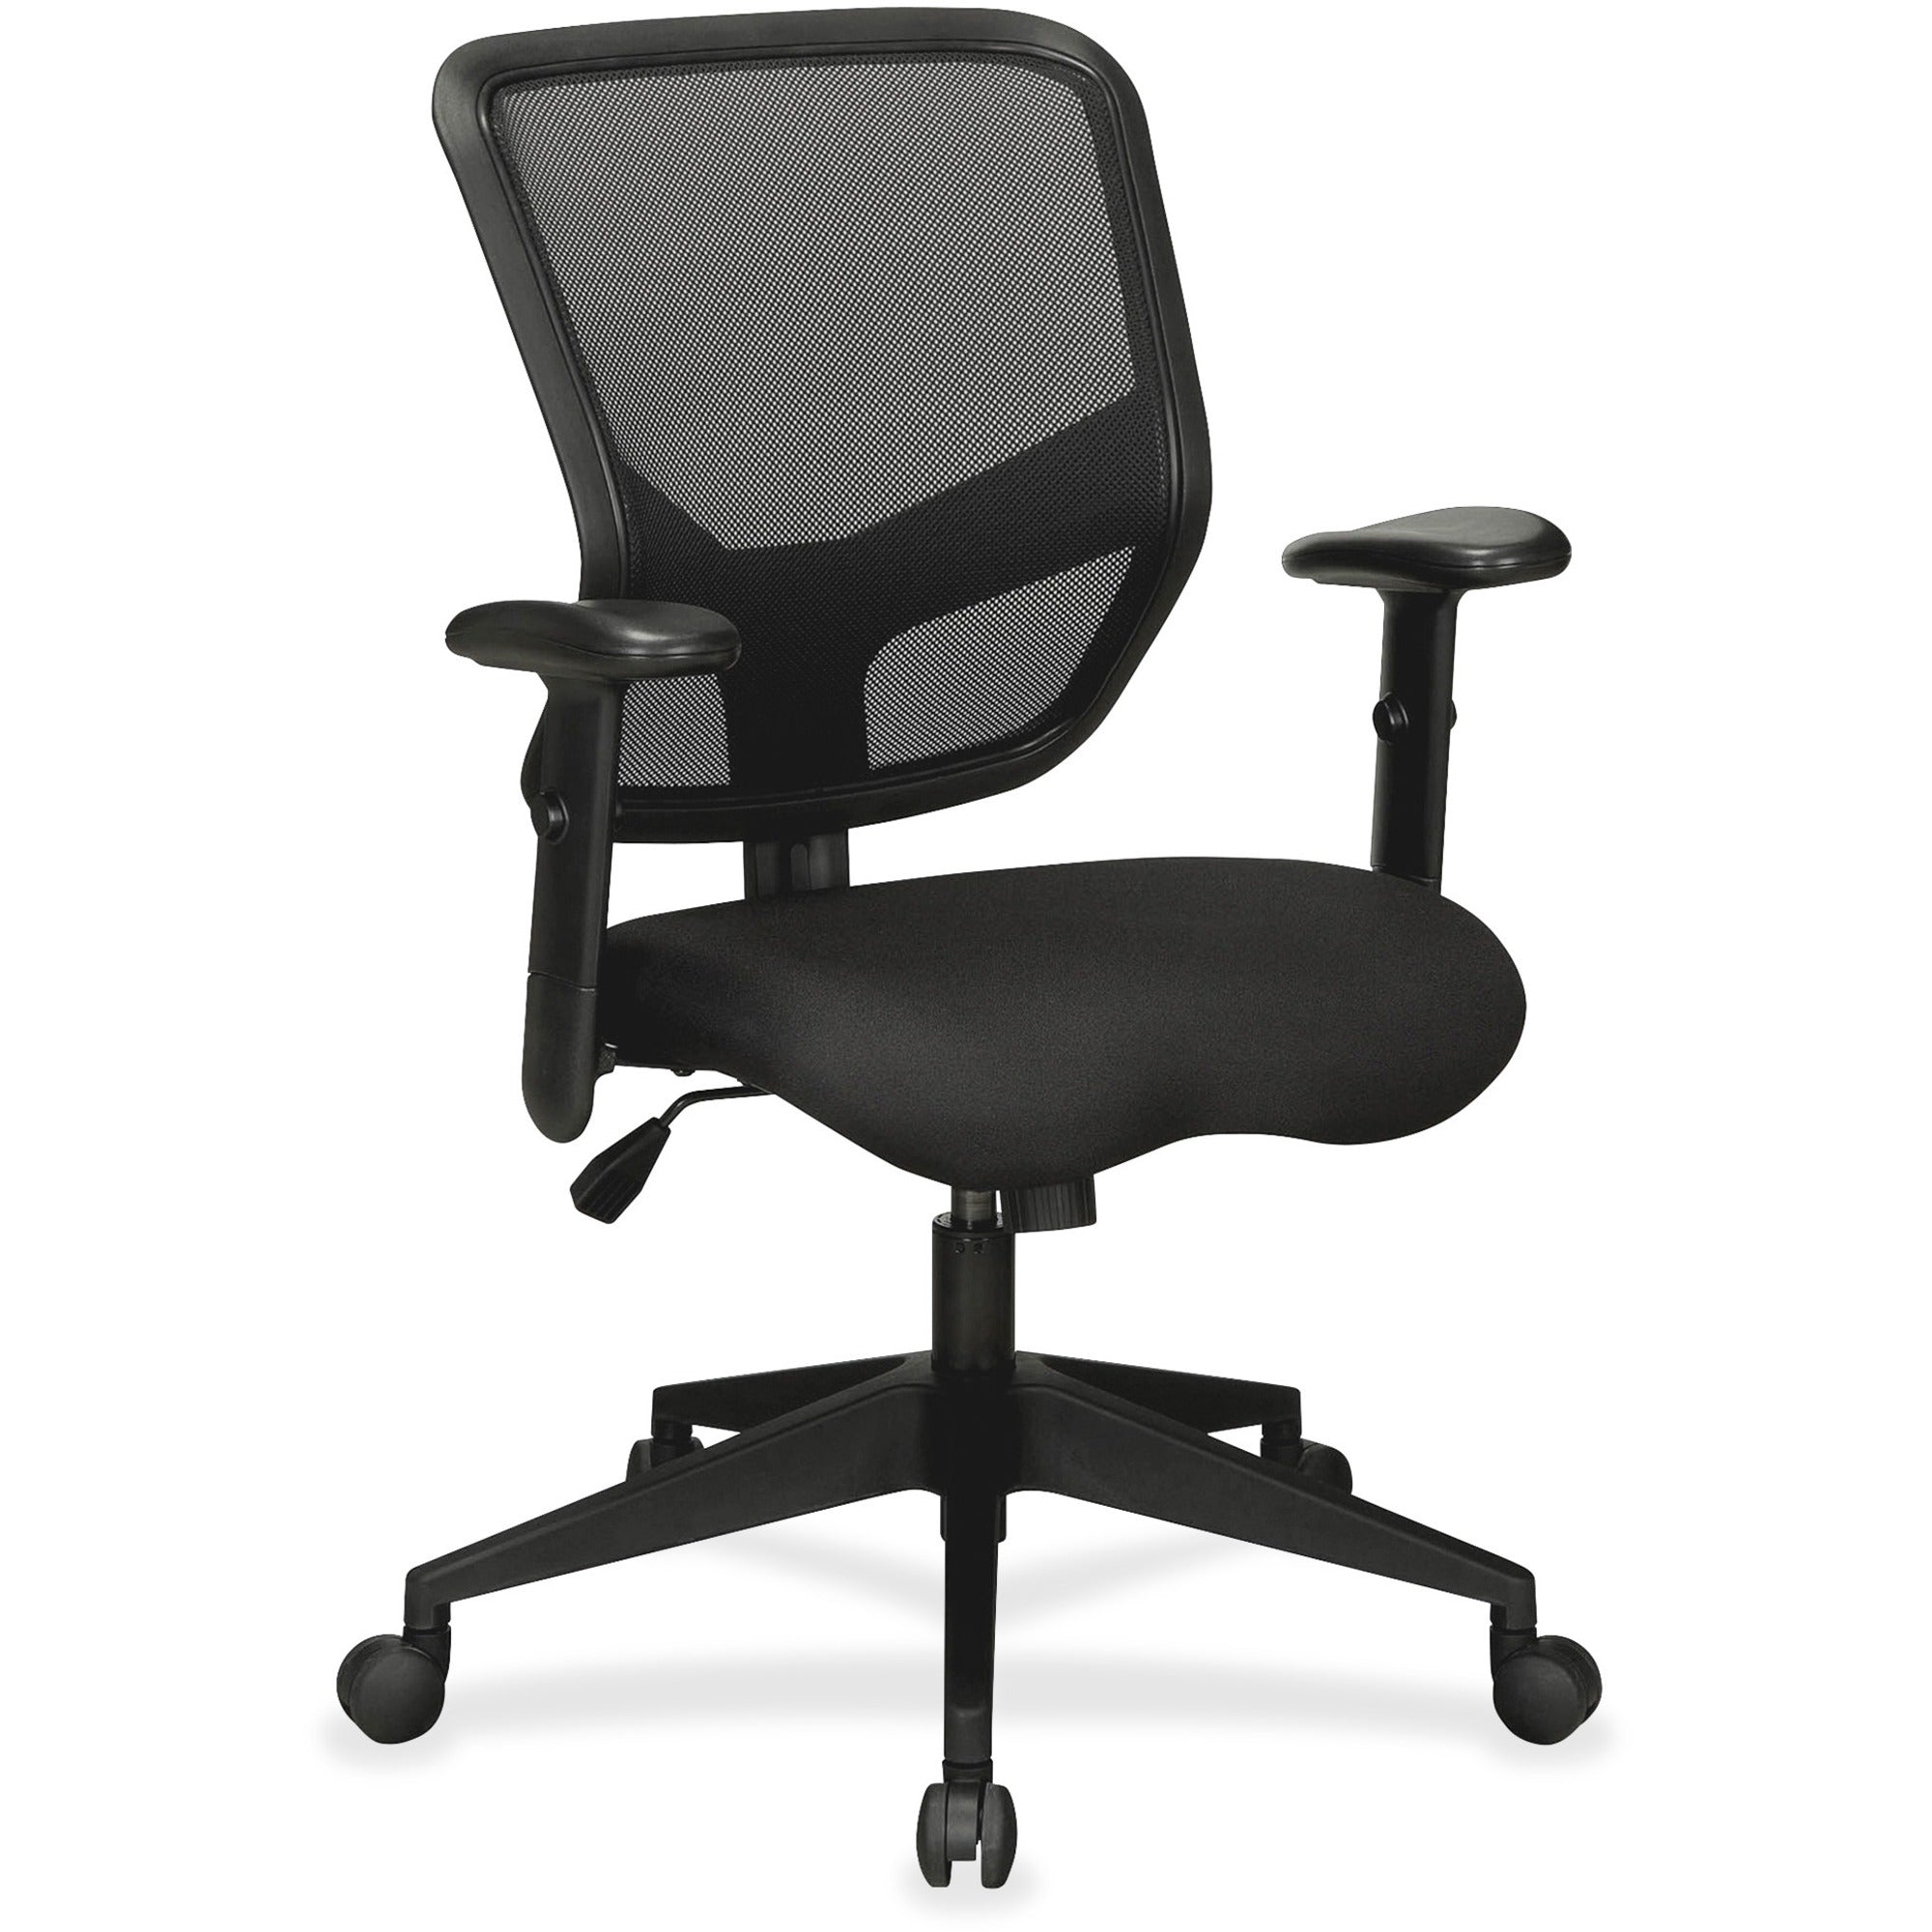 Lorell Executive Mesh Mid-Back Office Chair - Black Fabric Seat - Black Back - 5-star Base - 1 Each - 